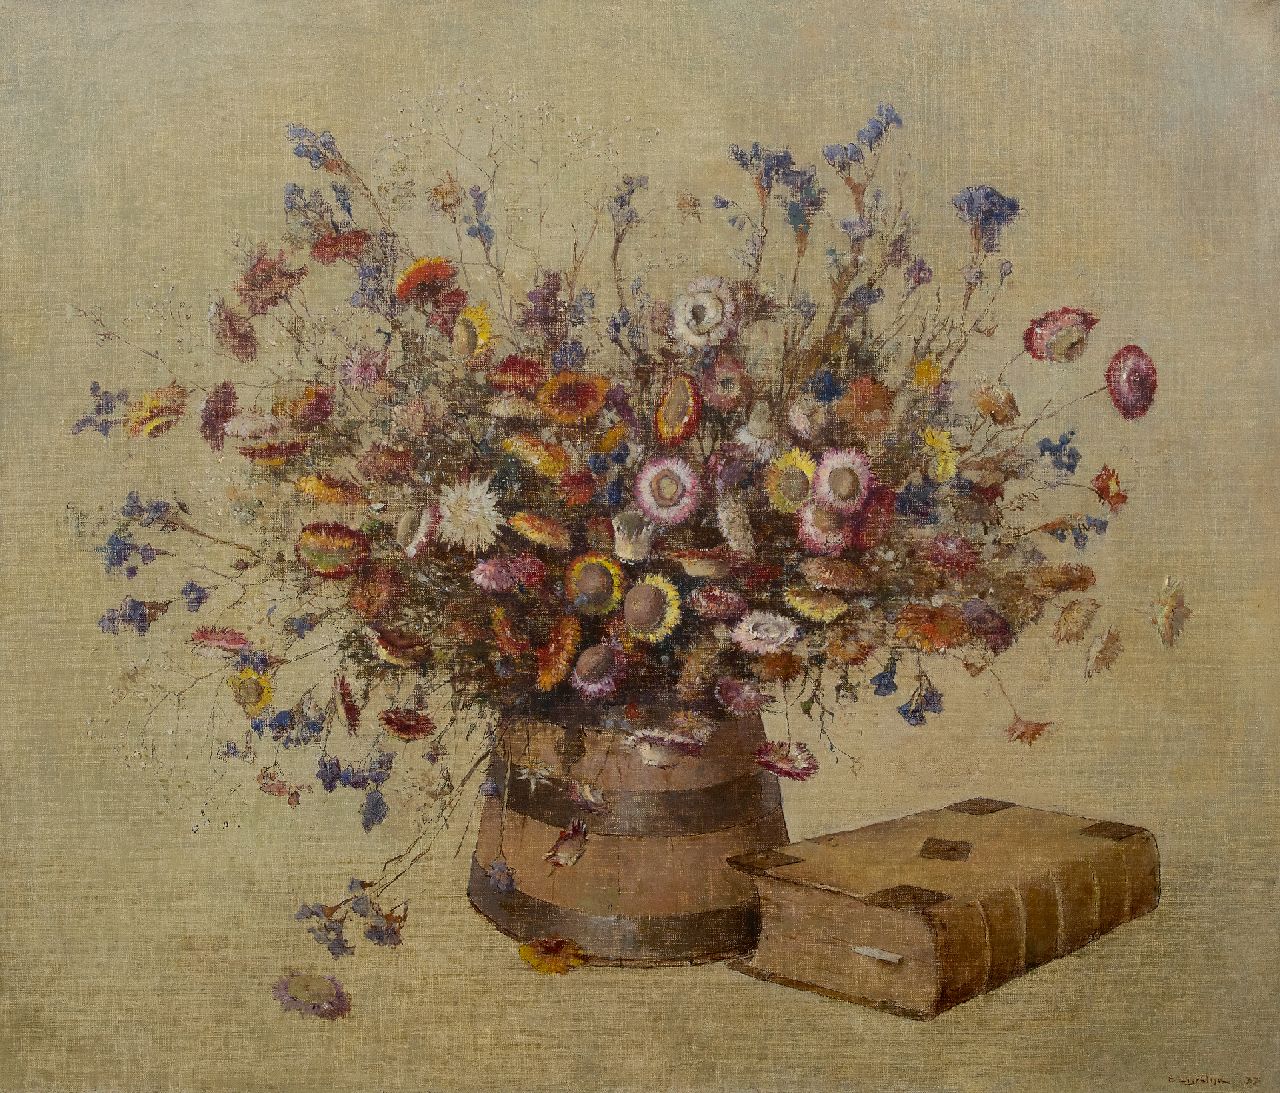 Ligtelijn E.J.  | Evert Jan Ligtelijn | Paintings offered for sale | Still life with dried flowers, oil on canvas 75.0 x 88.0 cm, signed l.r. and dated '37